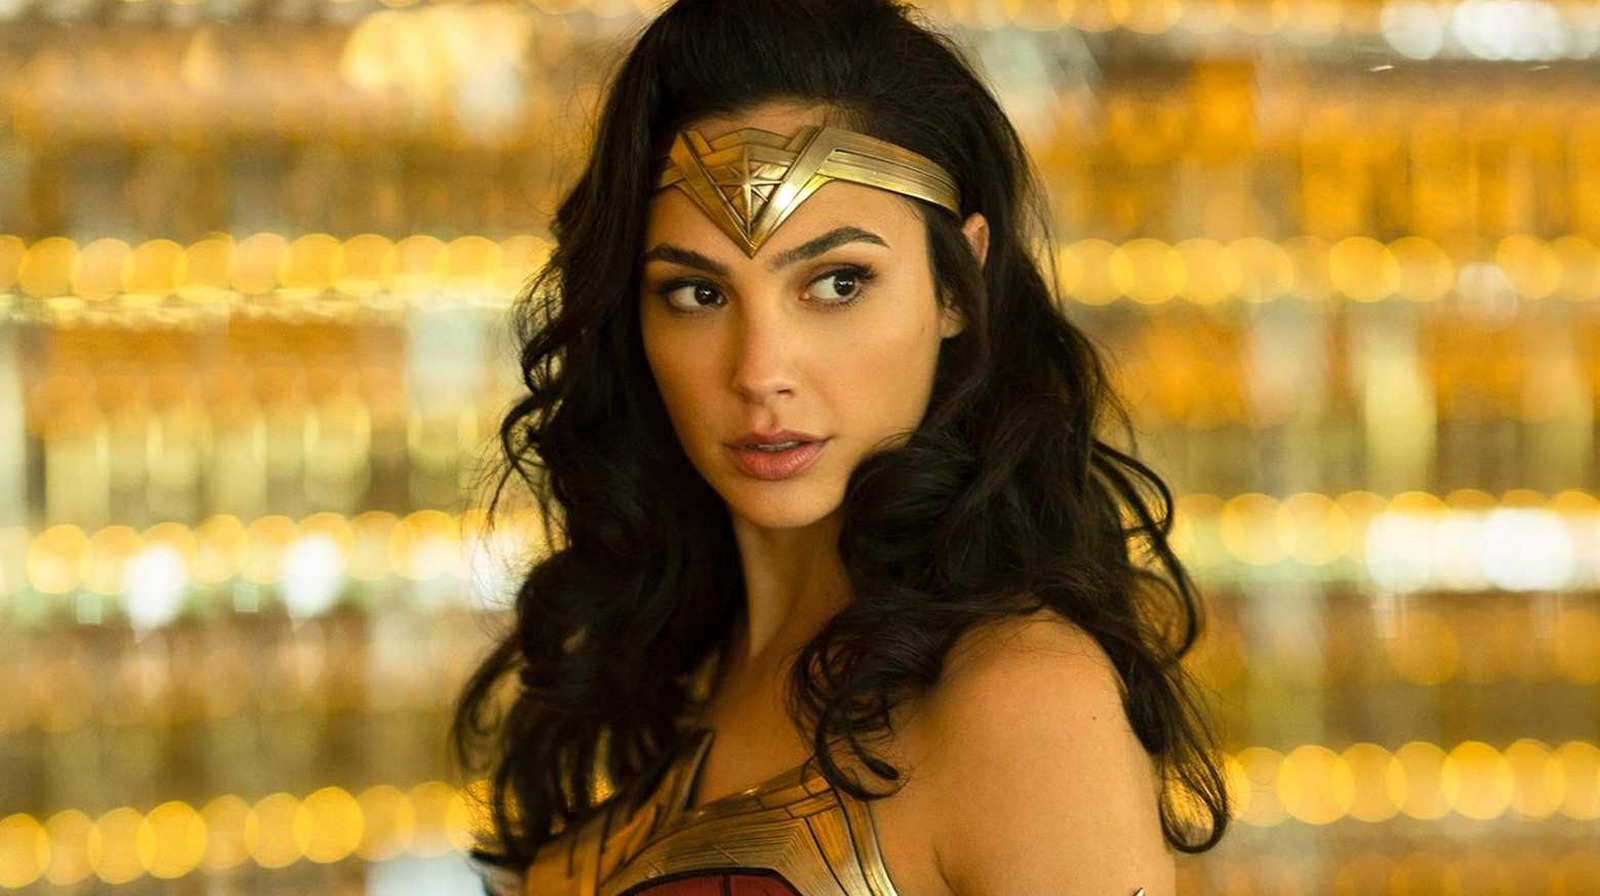 Disneys Live Action Snow White Has Found Its Gal Gadot That Is As The Evil Queen 